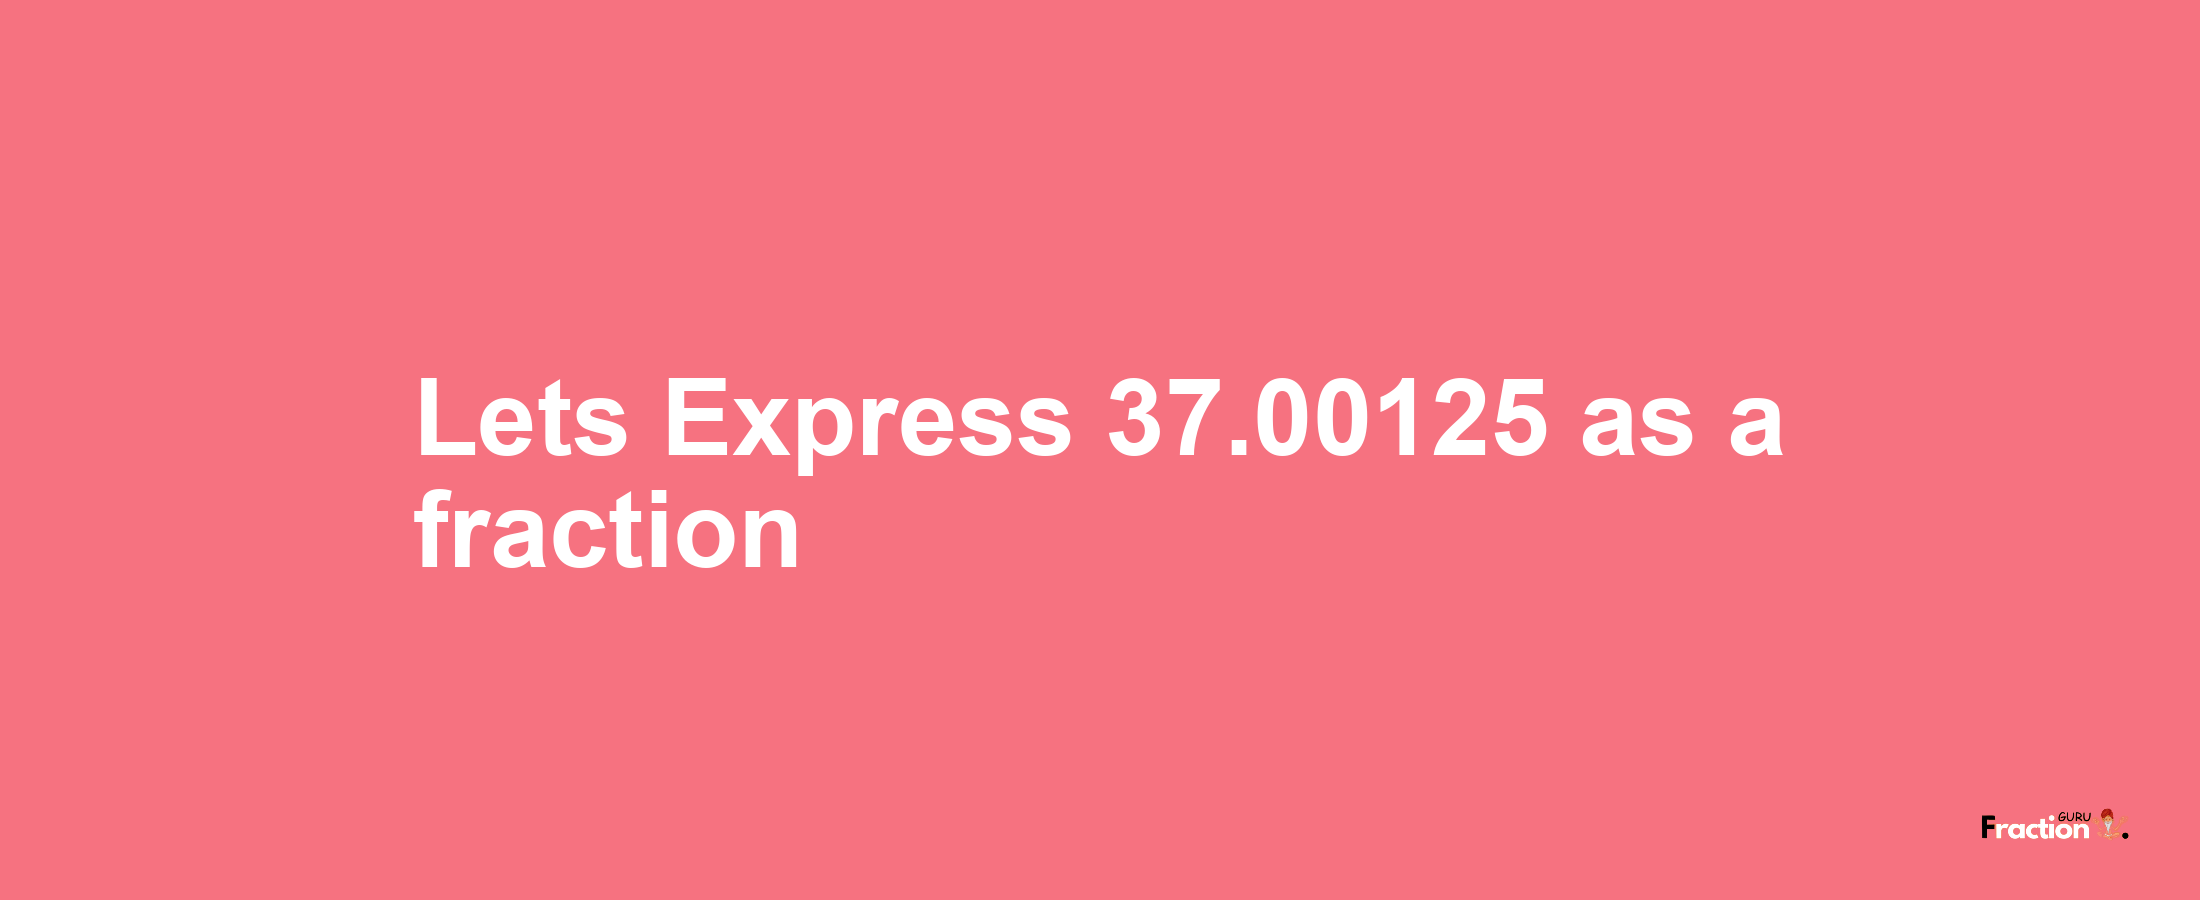 Lets Express 37.00125 as afraction